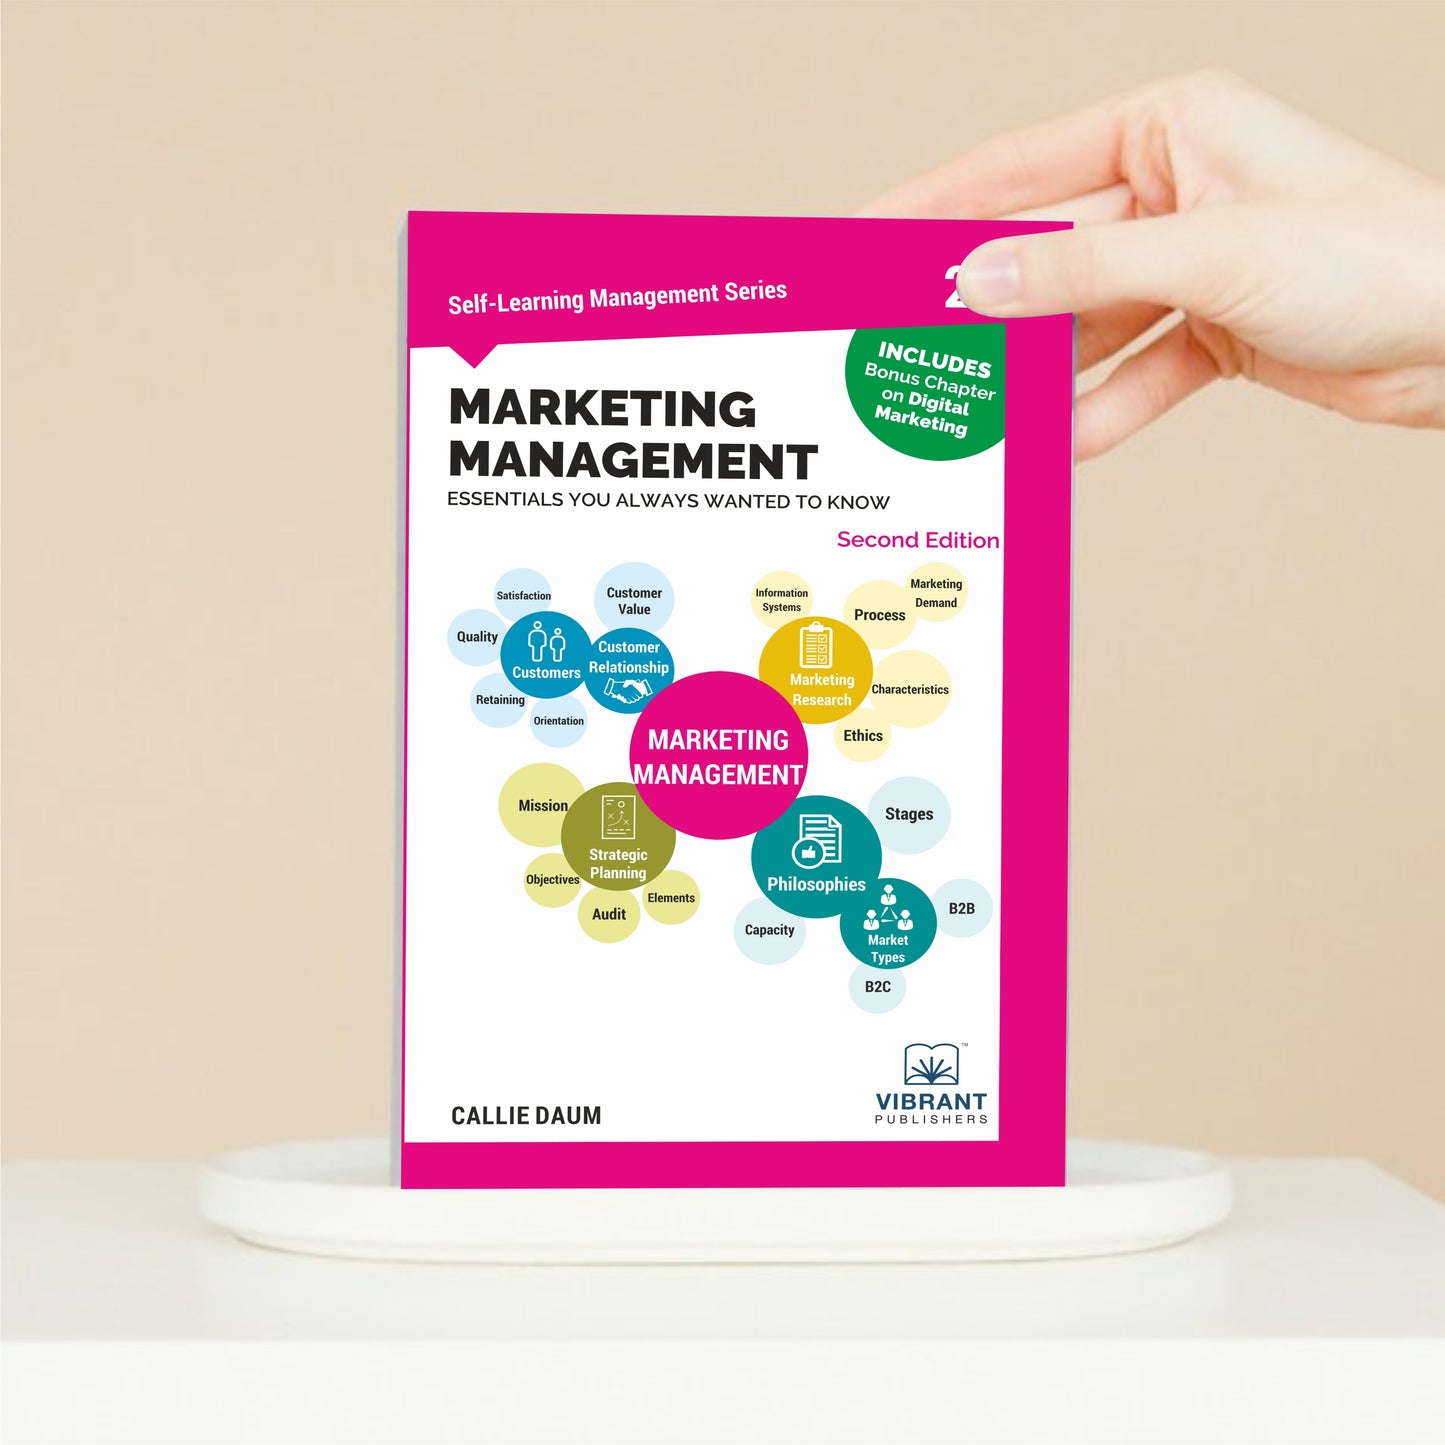 Marketing Management Essentials You Always Wanted To Know (2nd Edition)